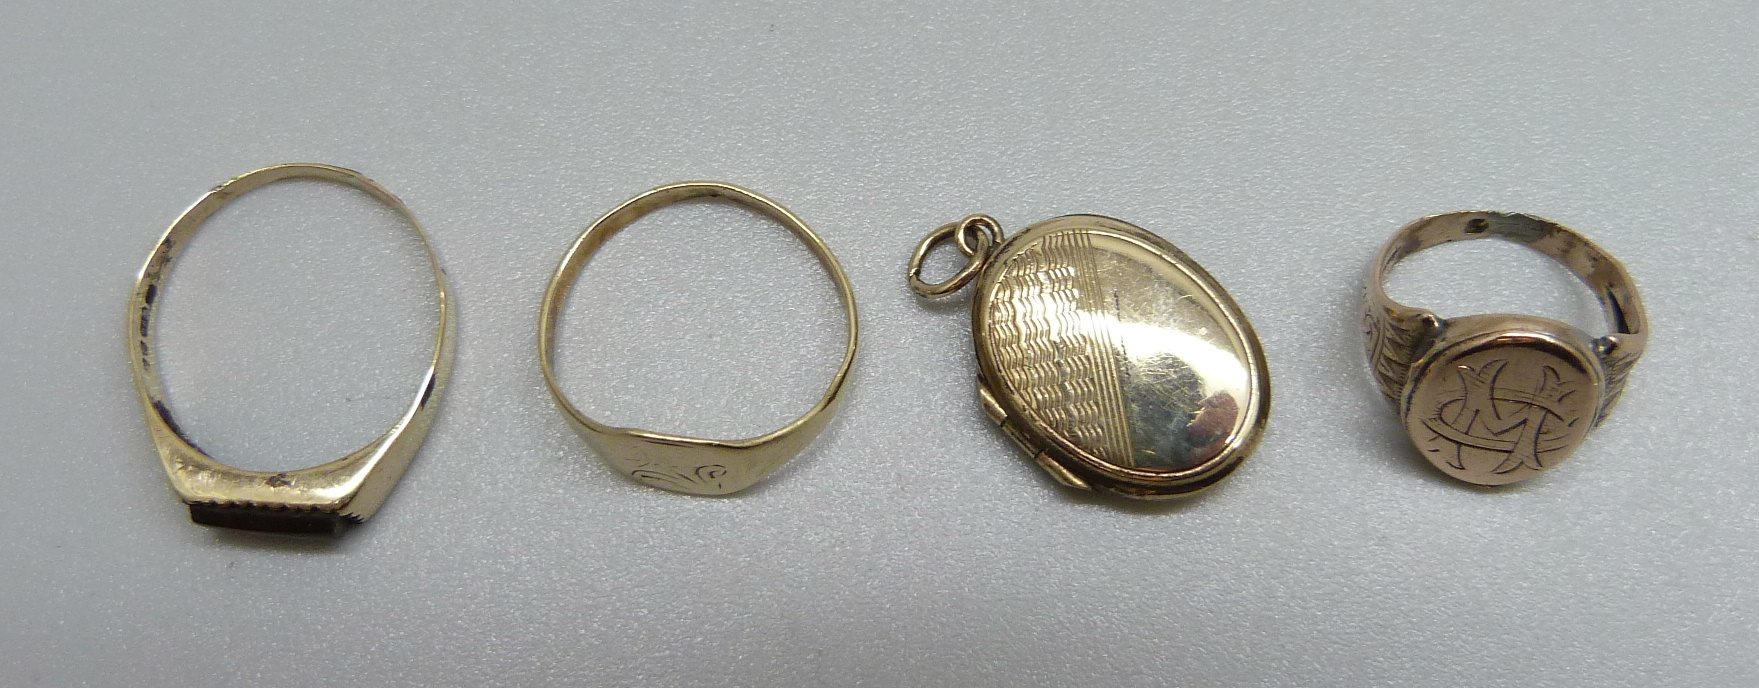 Two small 9ct gold rings, a yellow metal ring and a 9ct gold locket, total weight 6.1g, two rings - Image 2 of 2